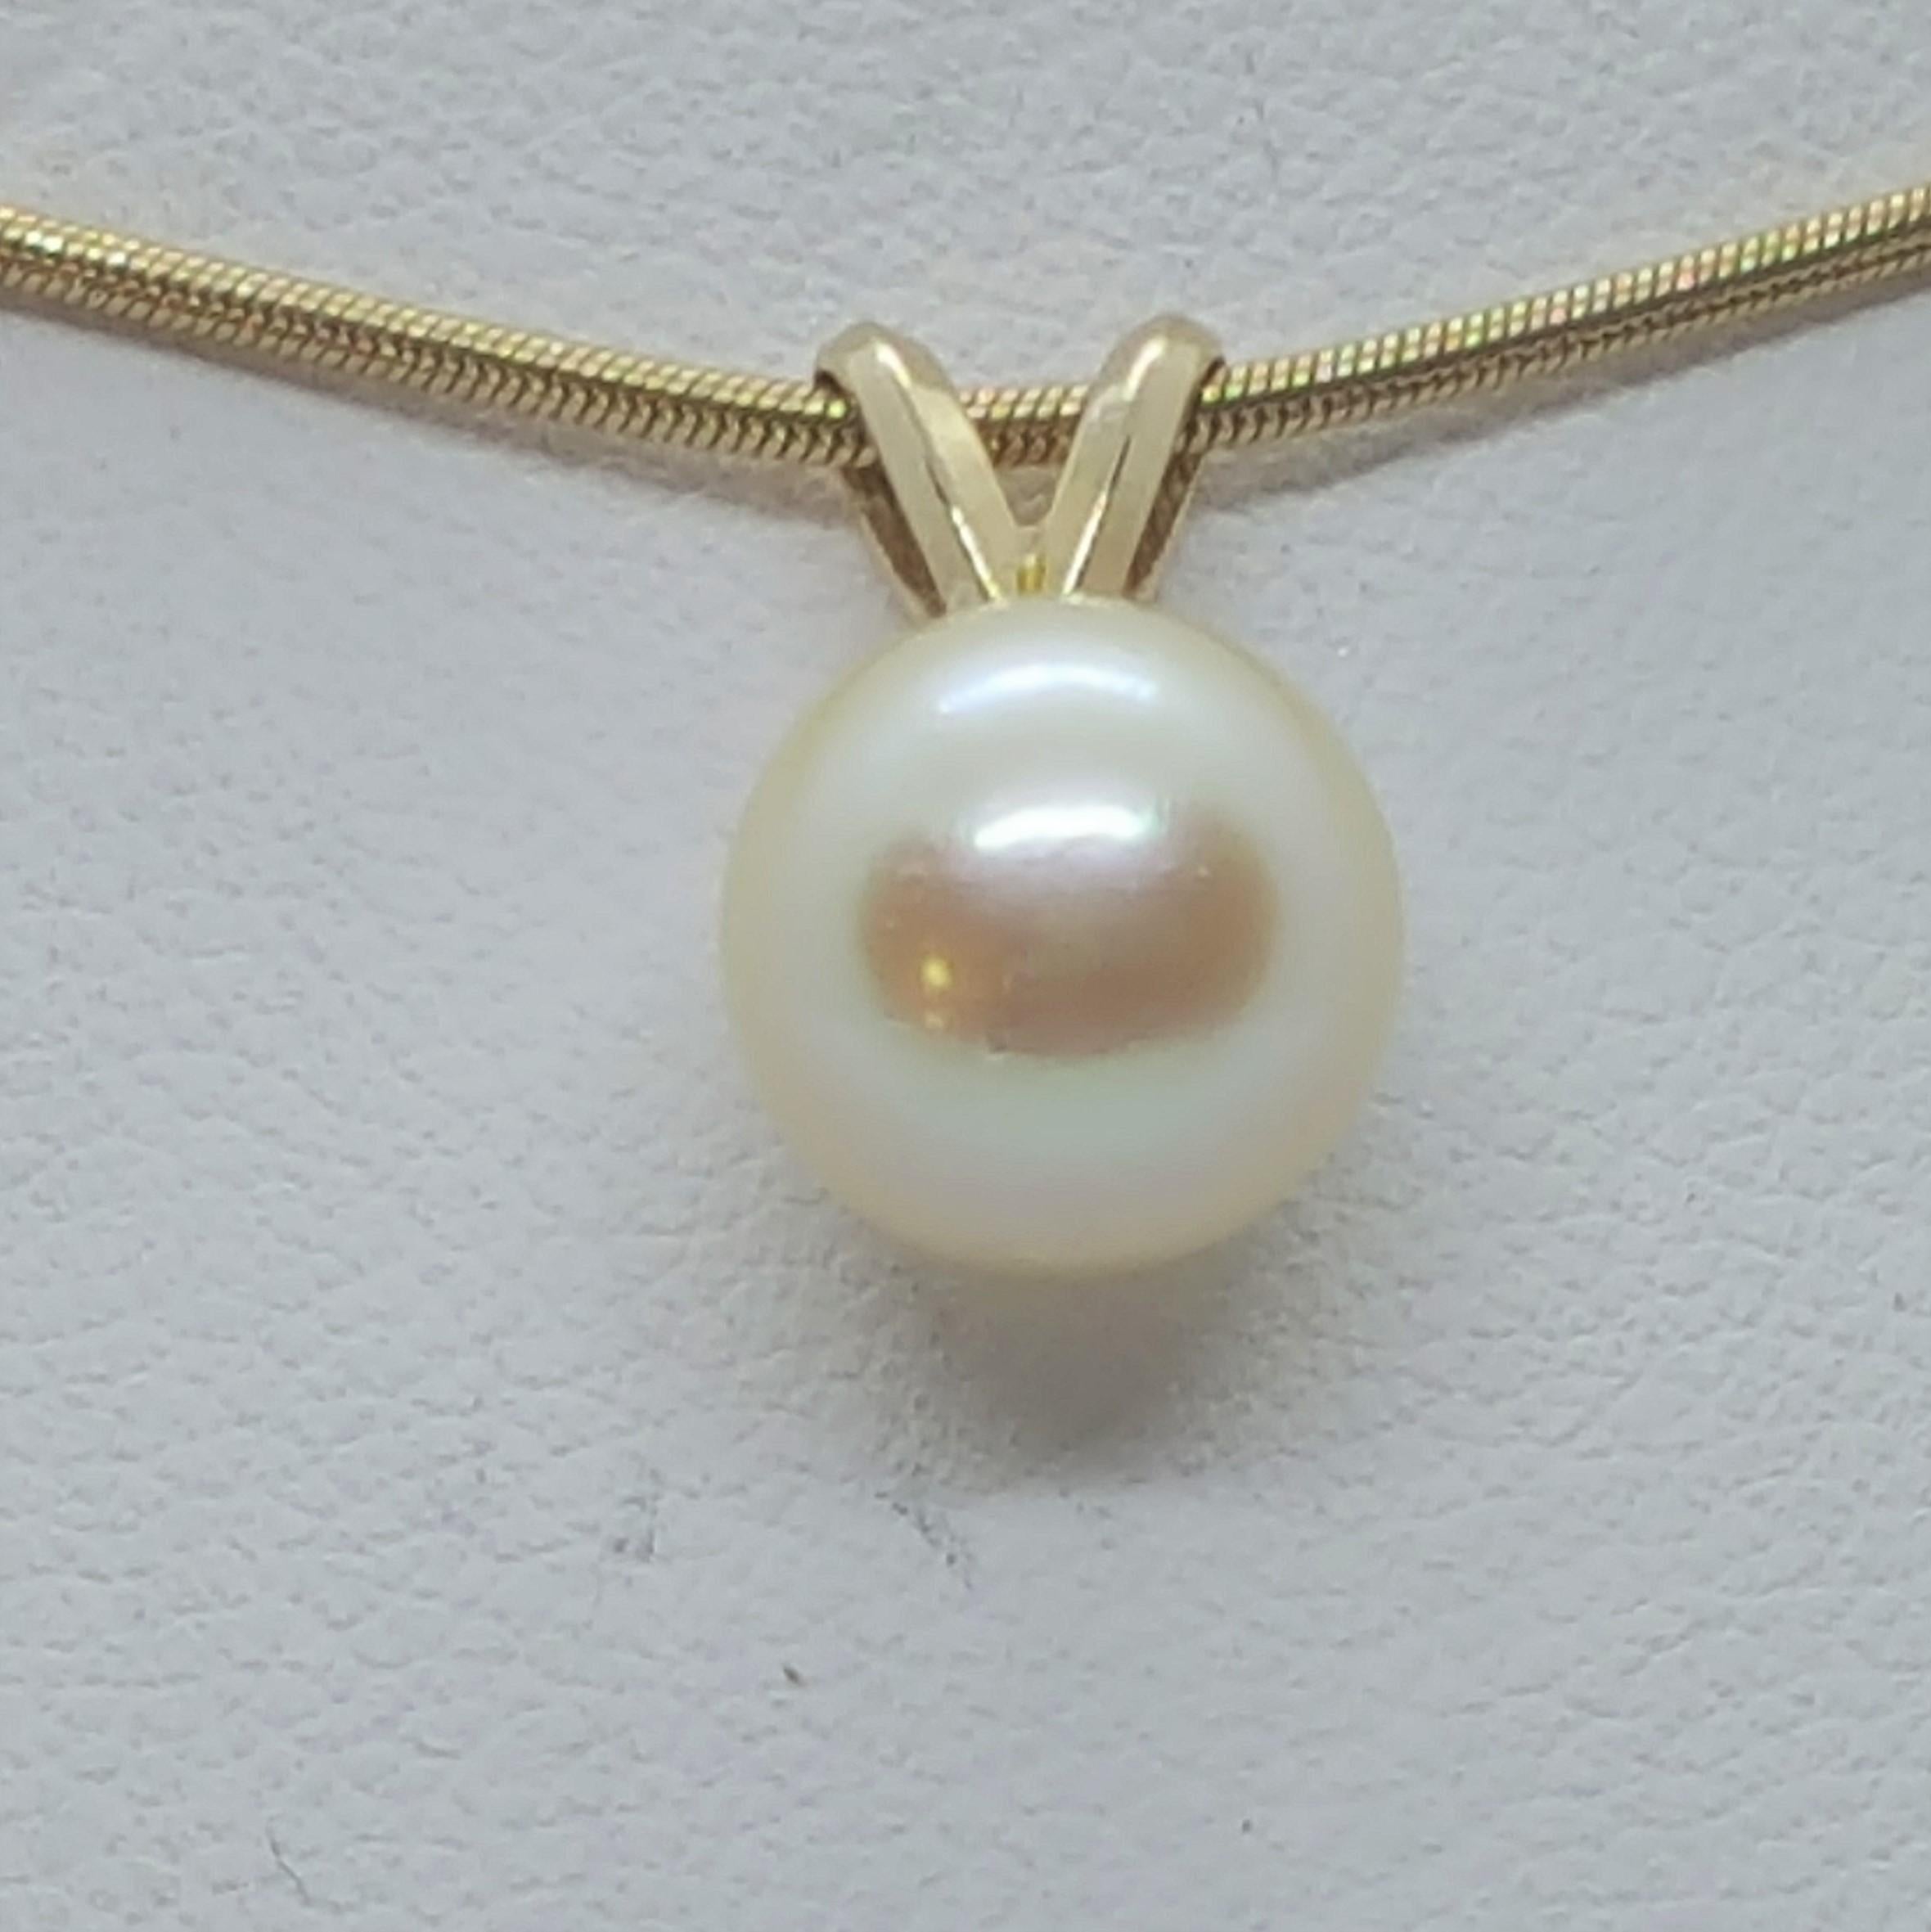 14kt yellow gold pendant with an 8.4mm pearl that has a clean nacre and lustrous finish. The total pendant length is 14mm long, weighs 1.1 grams, and is stamped 14kt. The chain is sold separately; we can assist you in ordering a chain that is